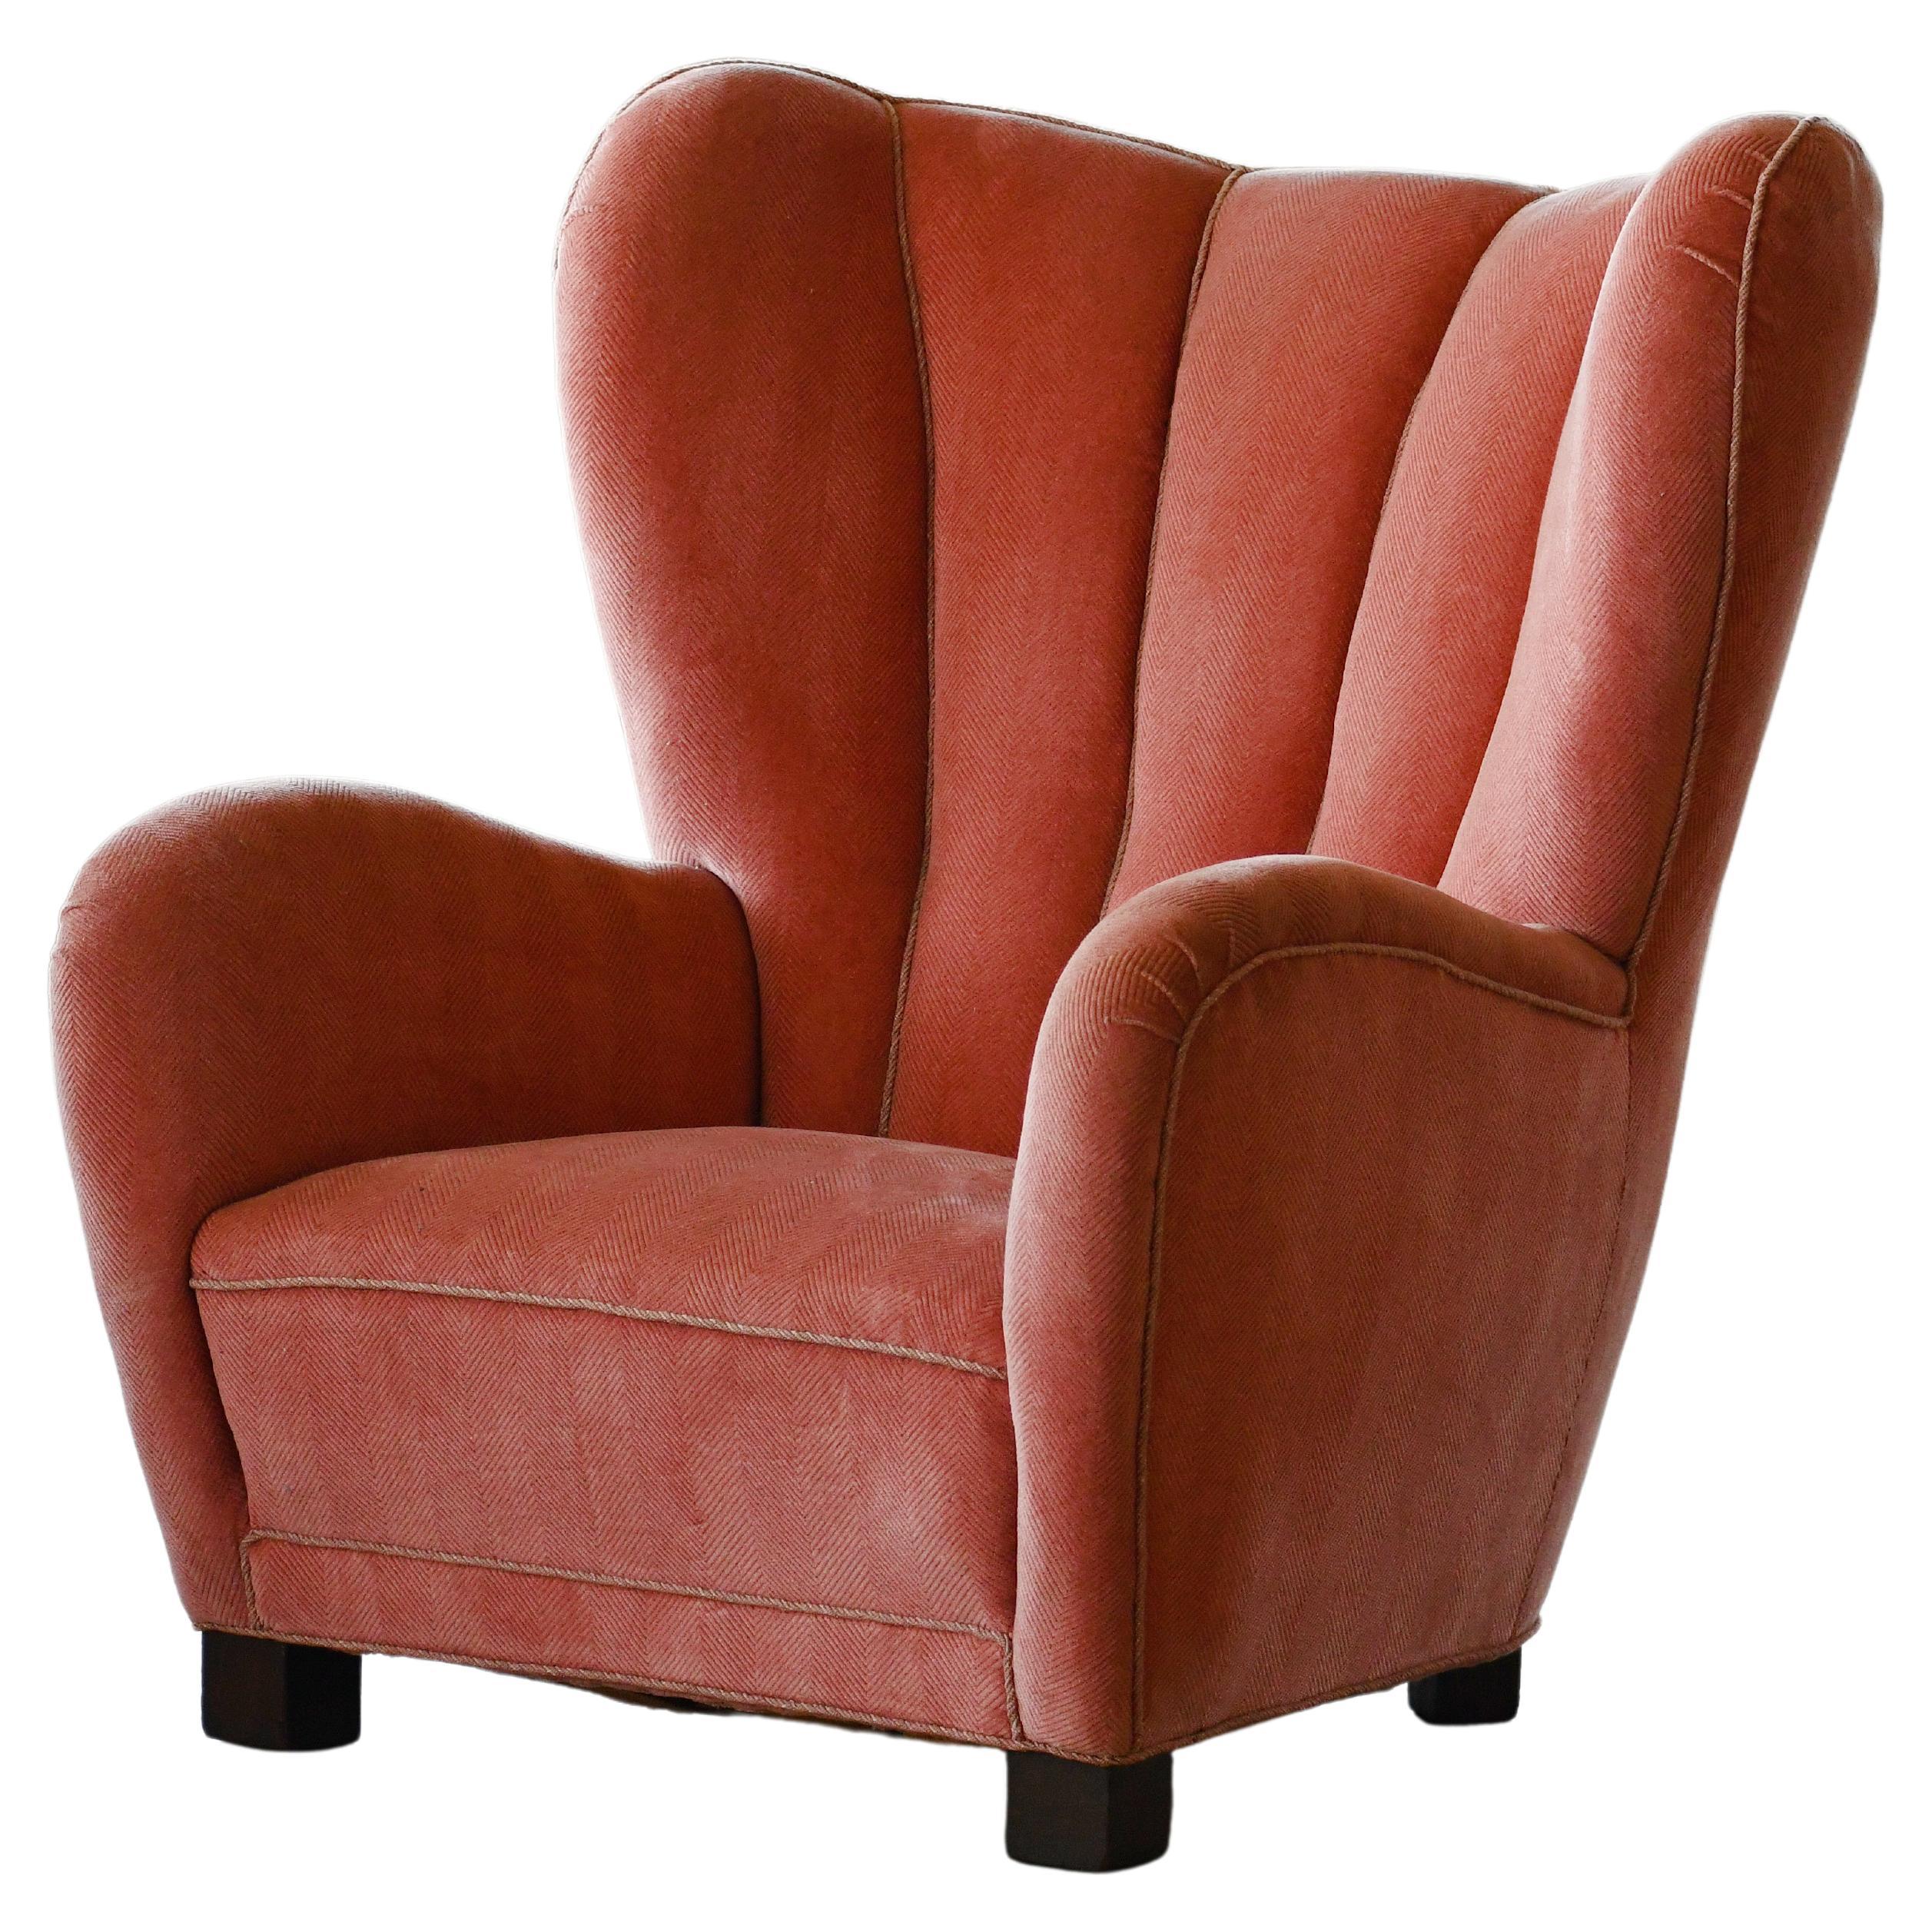 Large Danish 1940's Channelback Lounge Chair in Pink Mohair Round Organic Shape For Sale